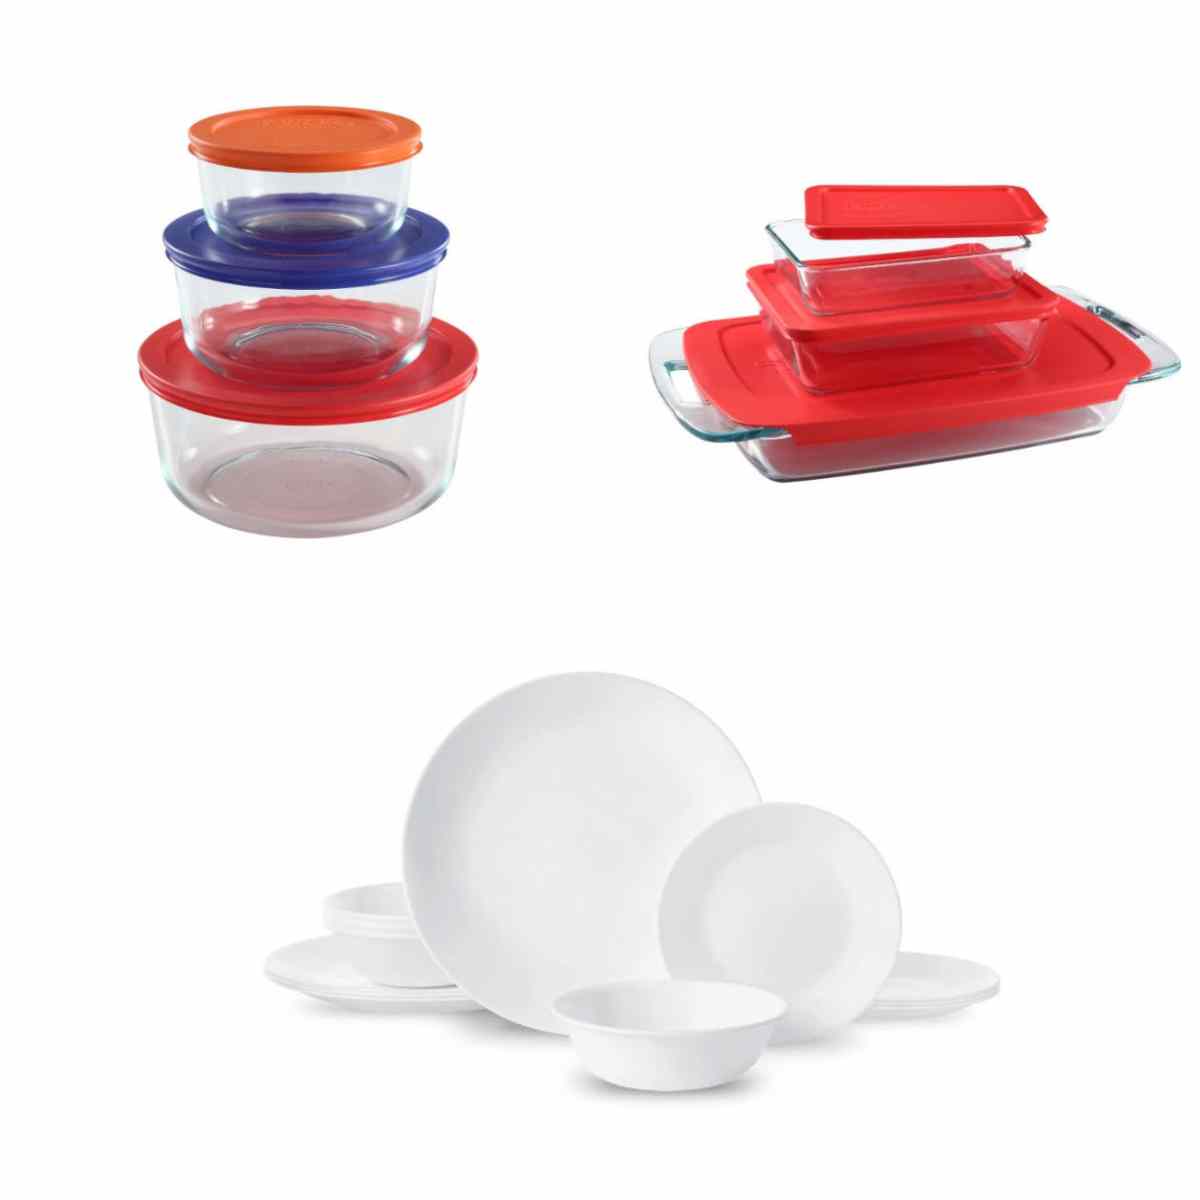 Pyrex glass mixing bowl/food storage sets with lids for $15 (Reg